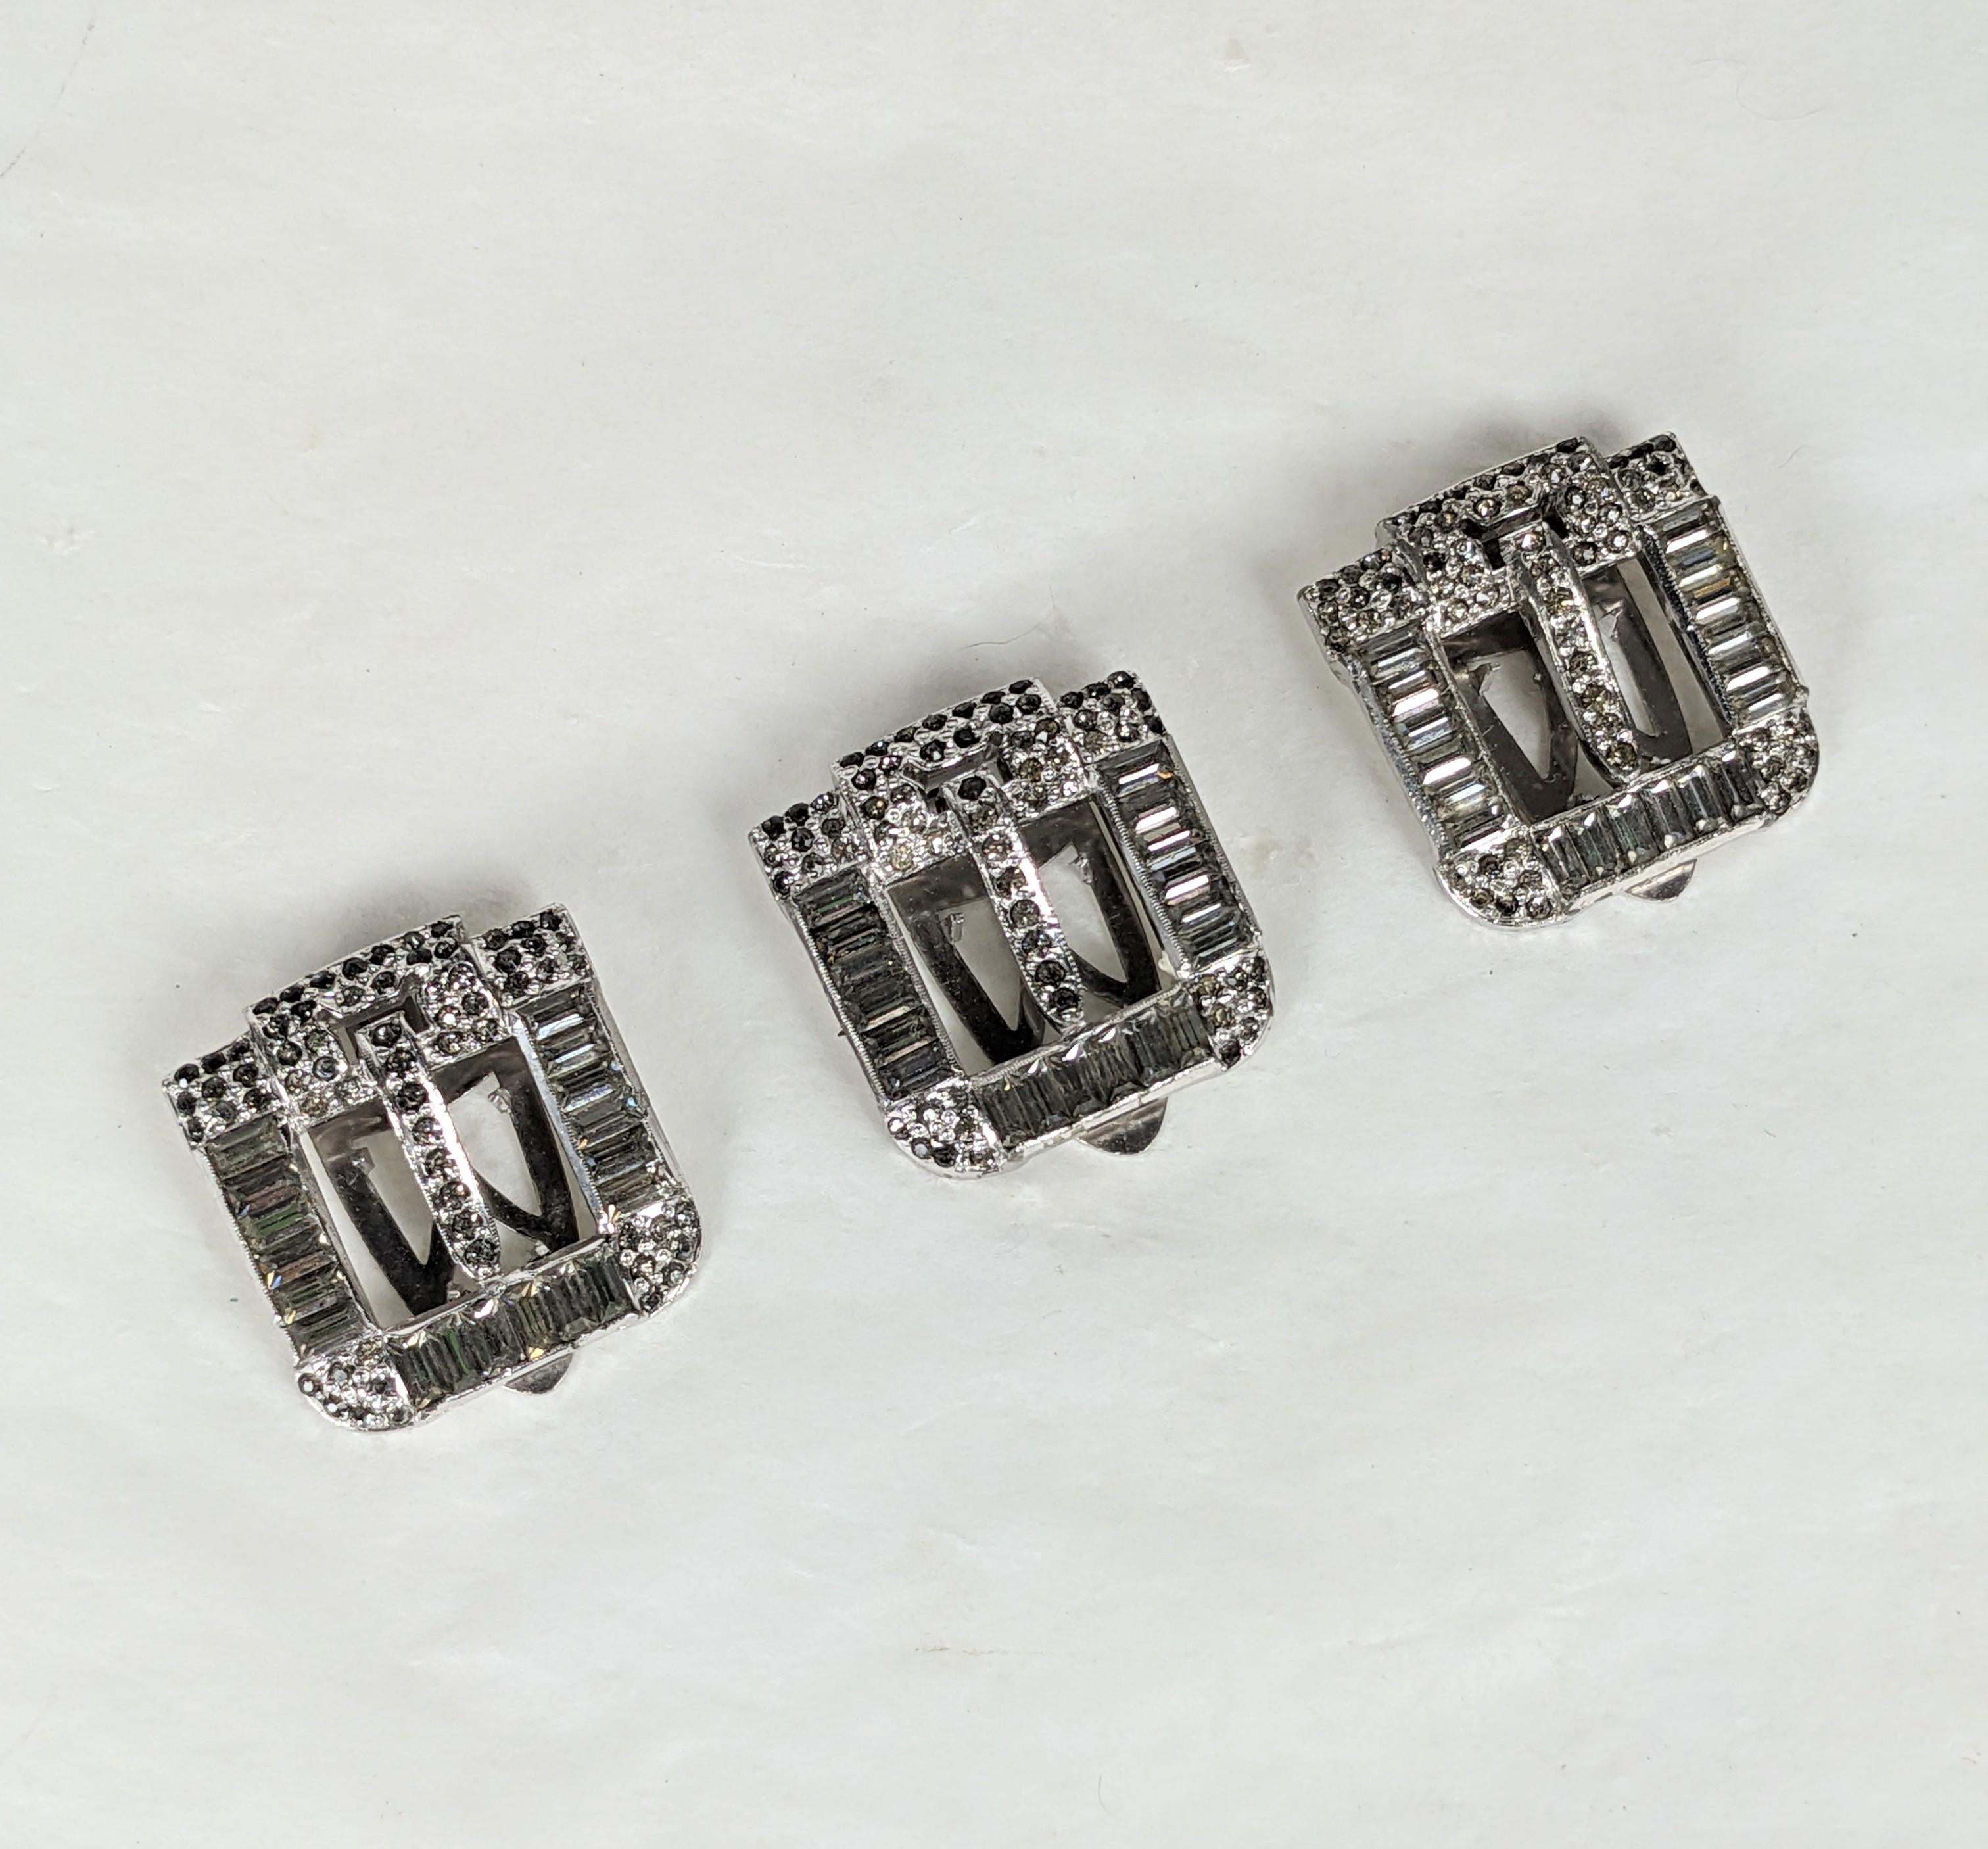 Elegant set of 3 Art Deco Buckle Clips from the 1920's. High quality early maker likely by Trifari. Open buckle design with baguette borders. 
Each 1